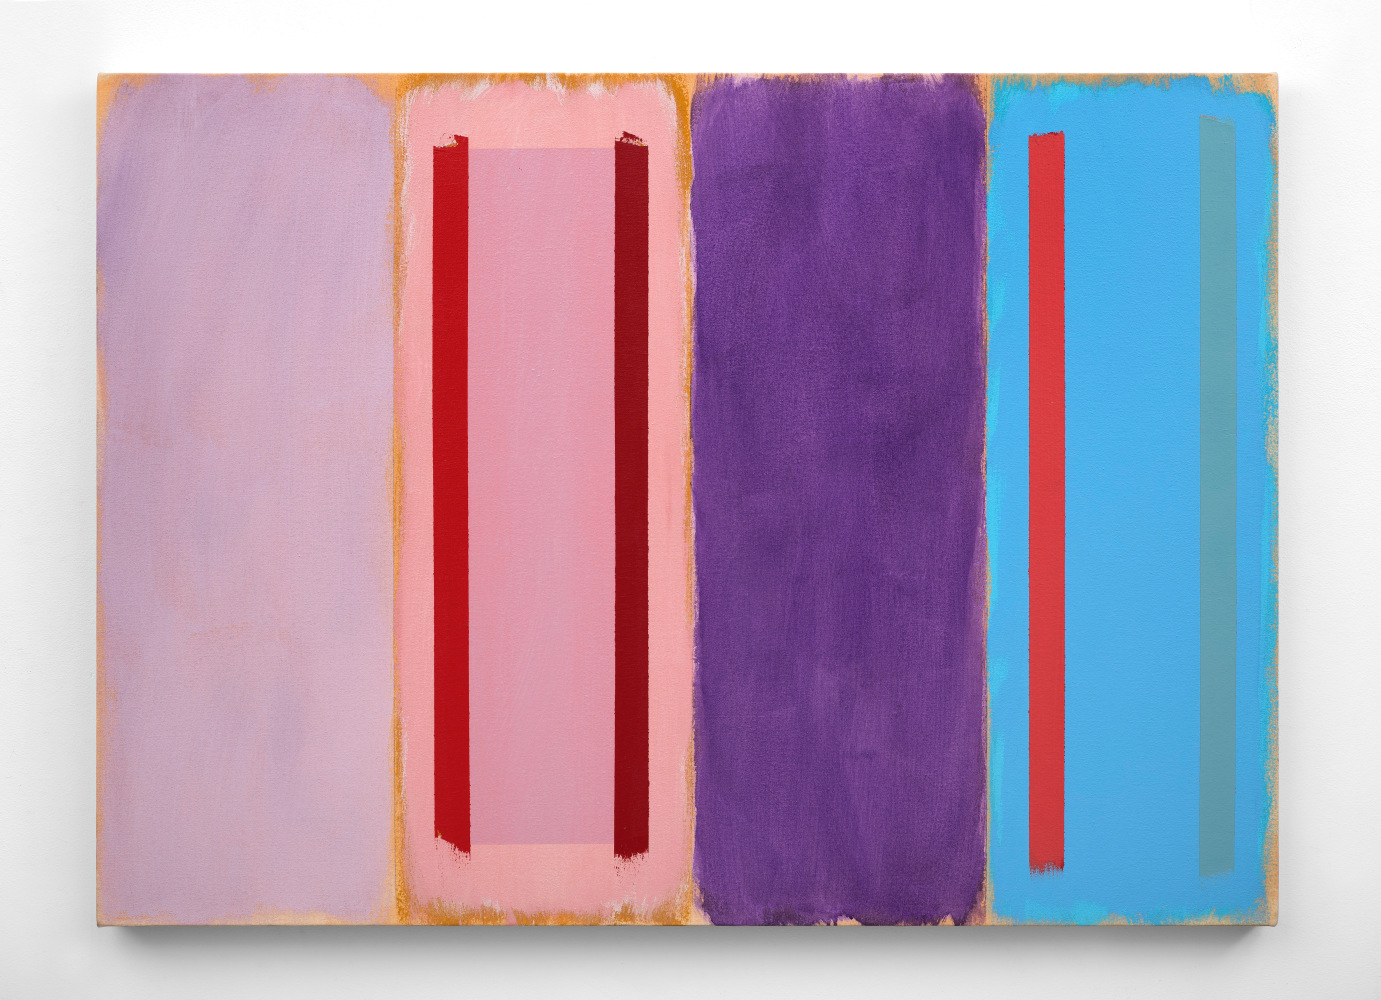 Lavender/ Pink, 1999, acrylic on canvas 36 x 50 inches;  91.4 x 127 centimeters LSFA# 13267